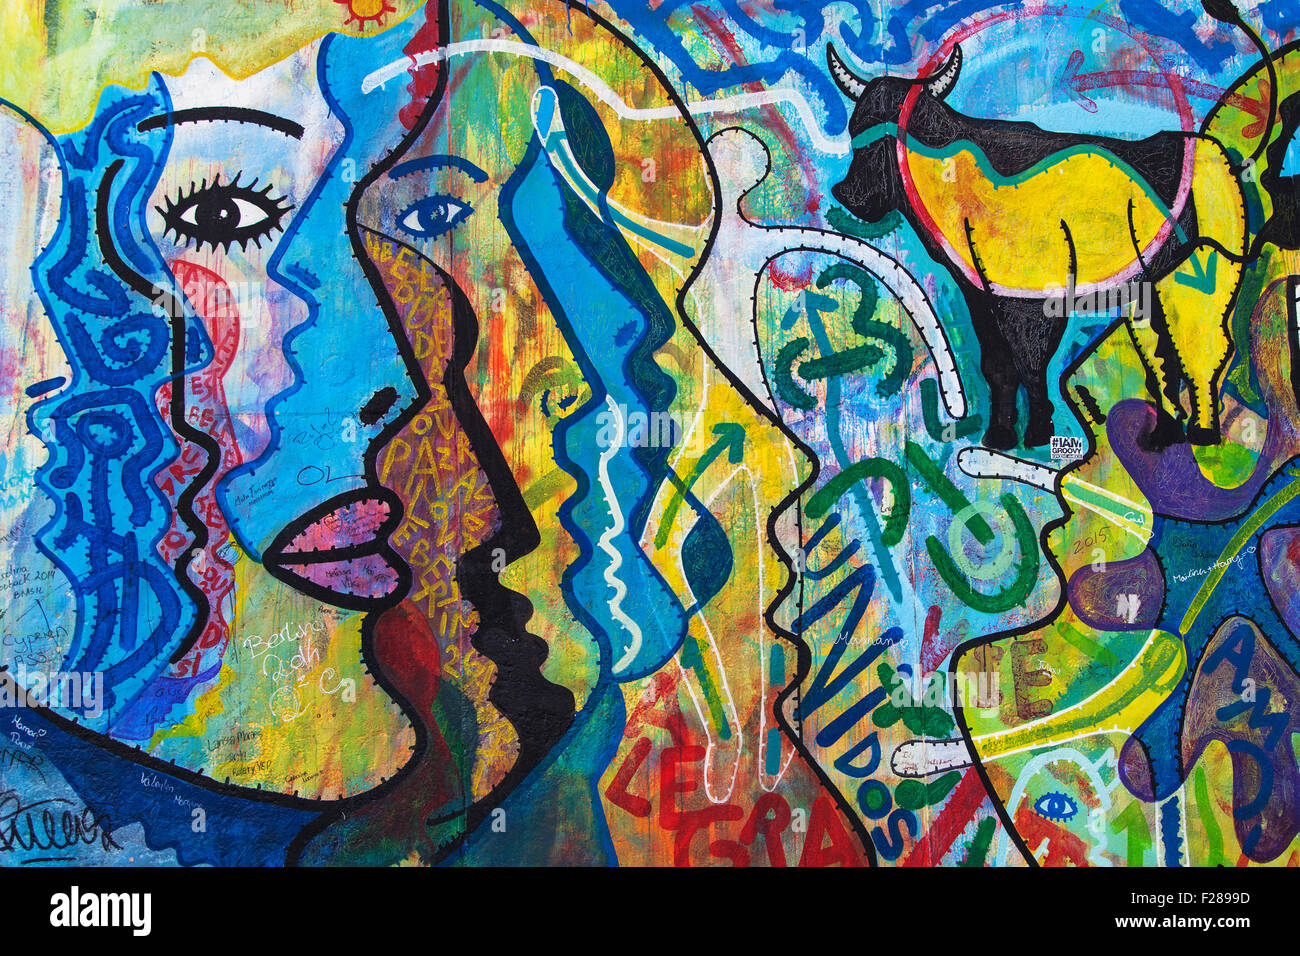 Faces in the mural 'O Povo Unido Nunca Mais Sera Veicido' by Kim Prisu on the East Side Gallery on August 8, 2015 in Berlin Stock Photo